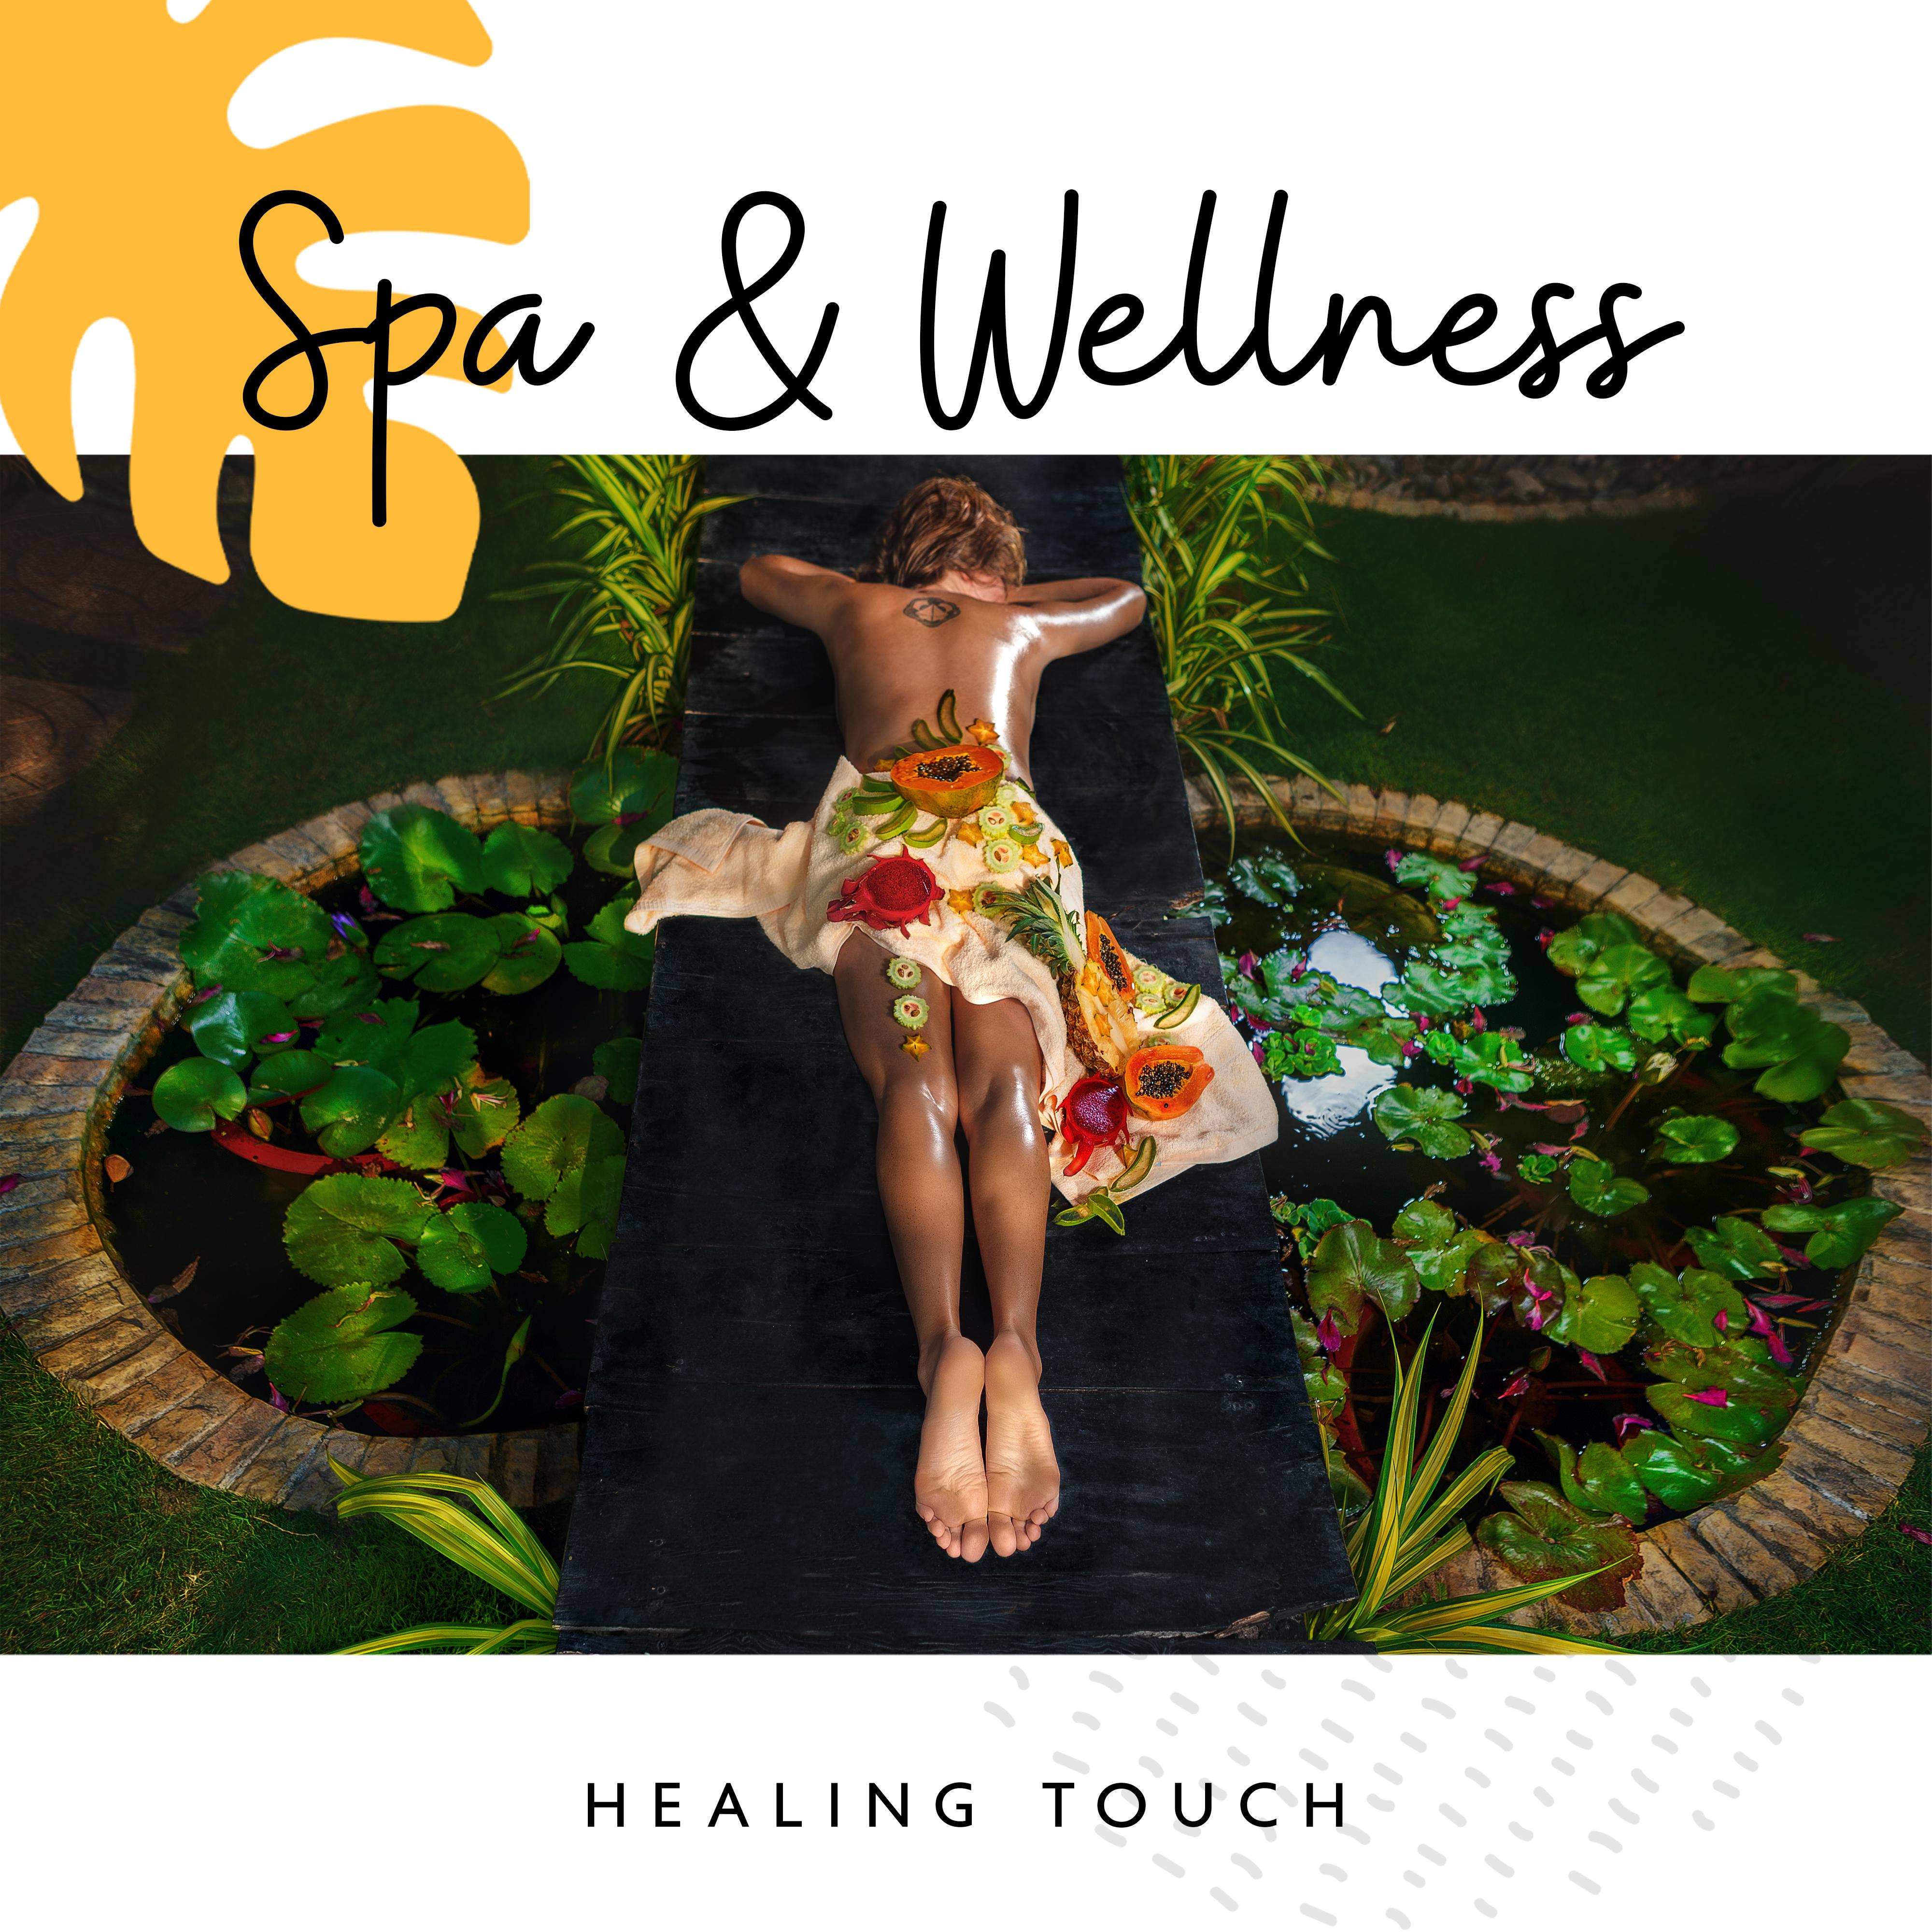 Spa  Wellness Healing Touch  2019 New Age Ambient  Nature Spa Salon Music for Healing Therapies Like Massage, Hot Bath, Sauna